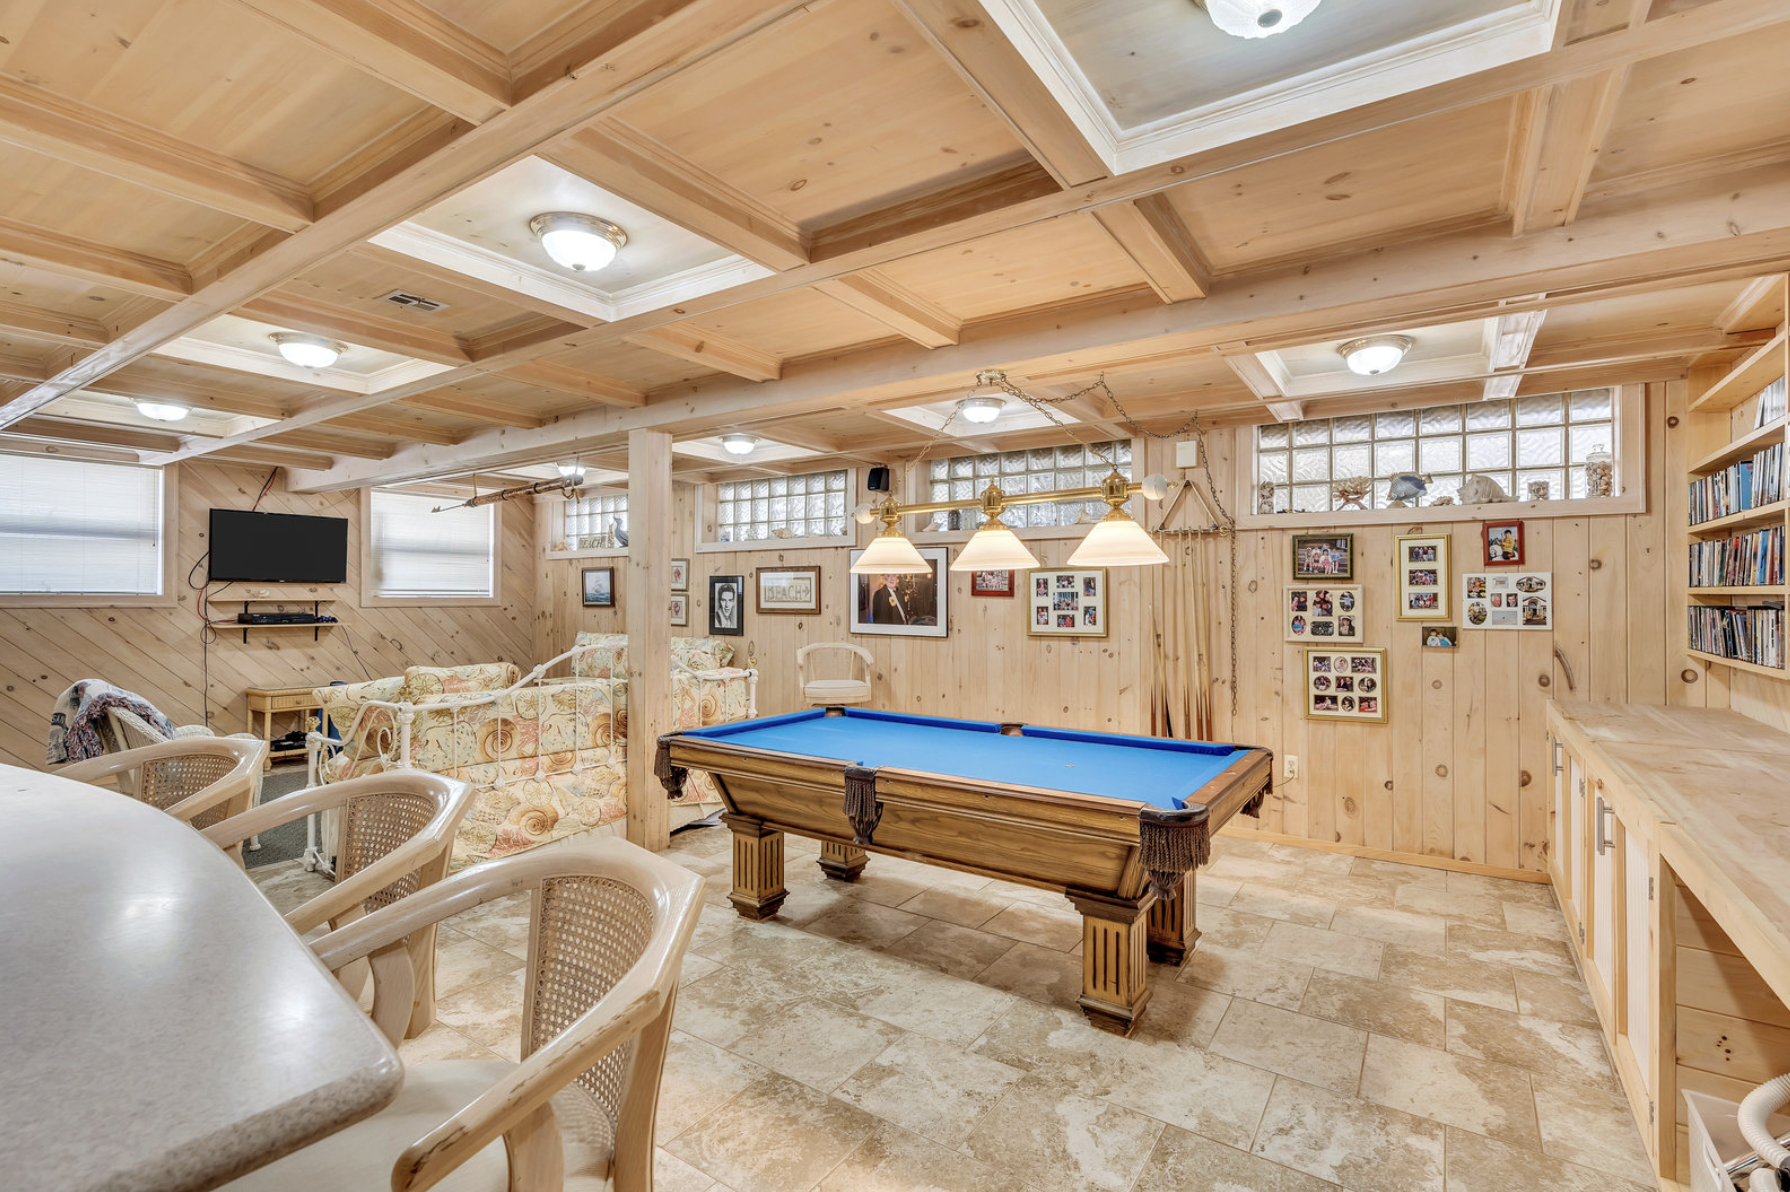 Frank Sinatra's music found a home at this Shore house on sale for a cool  $4.4M 